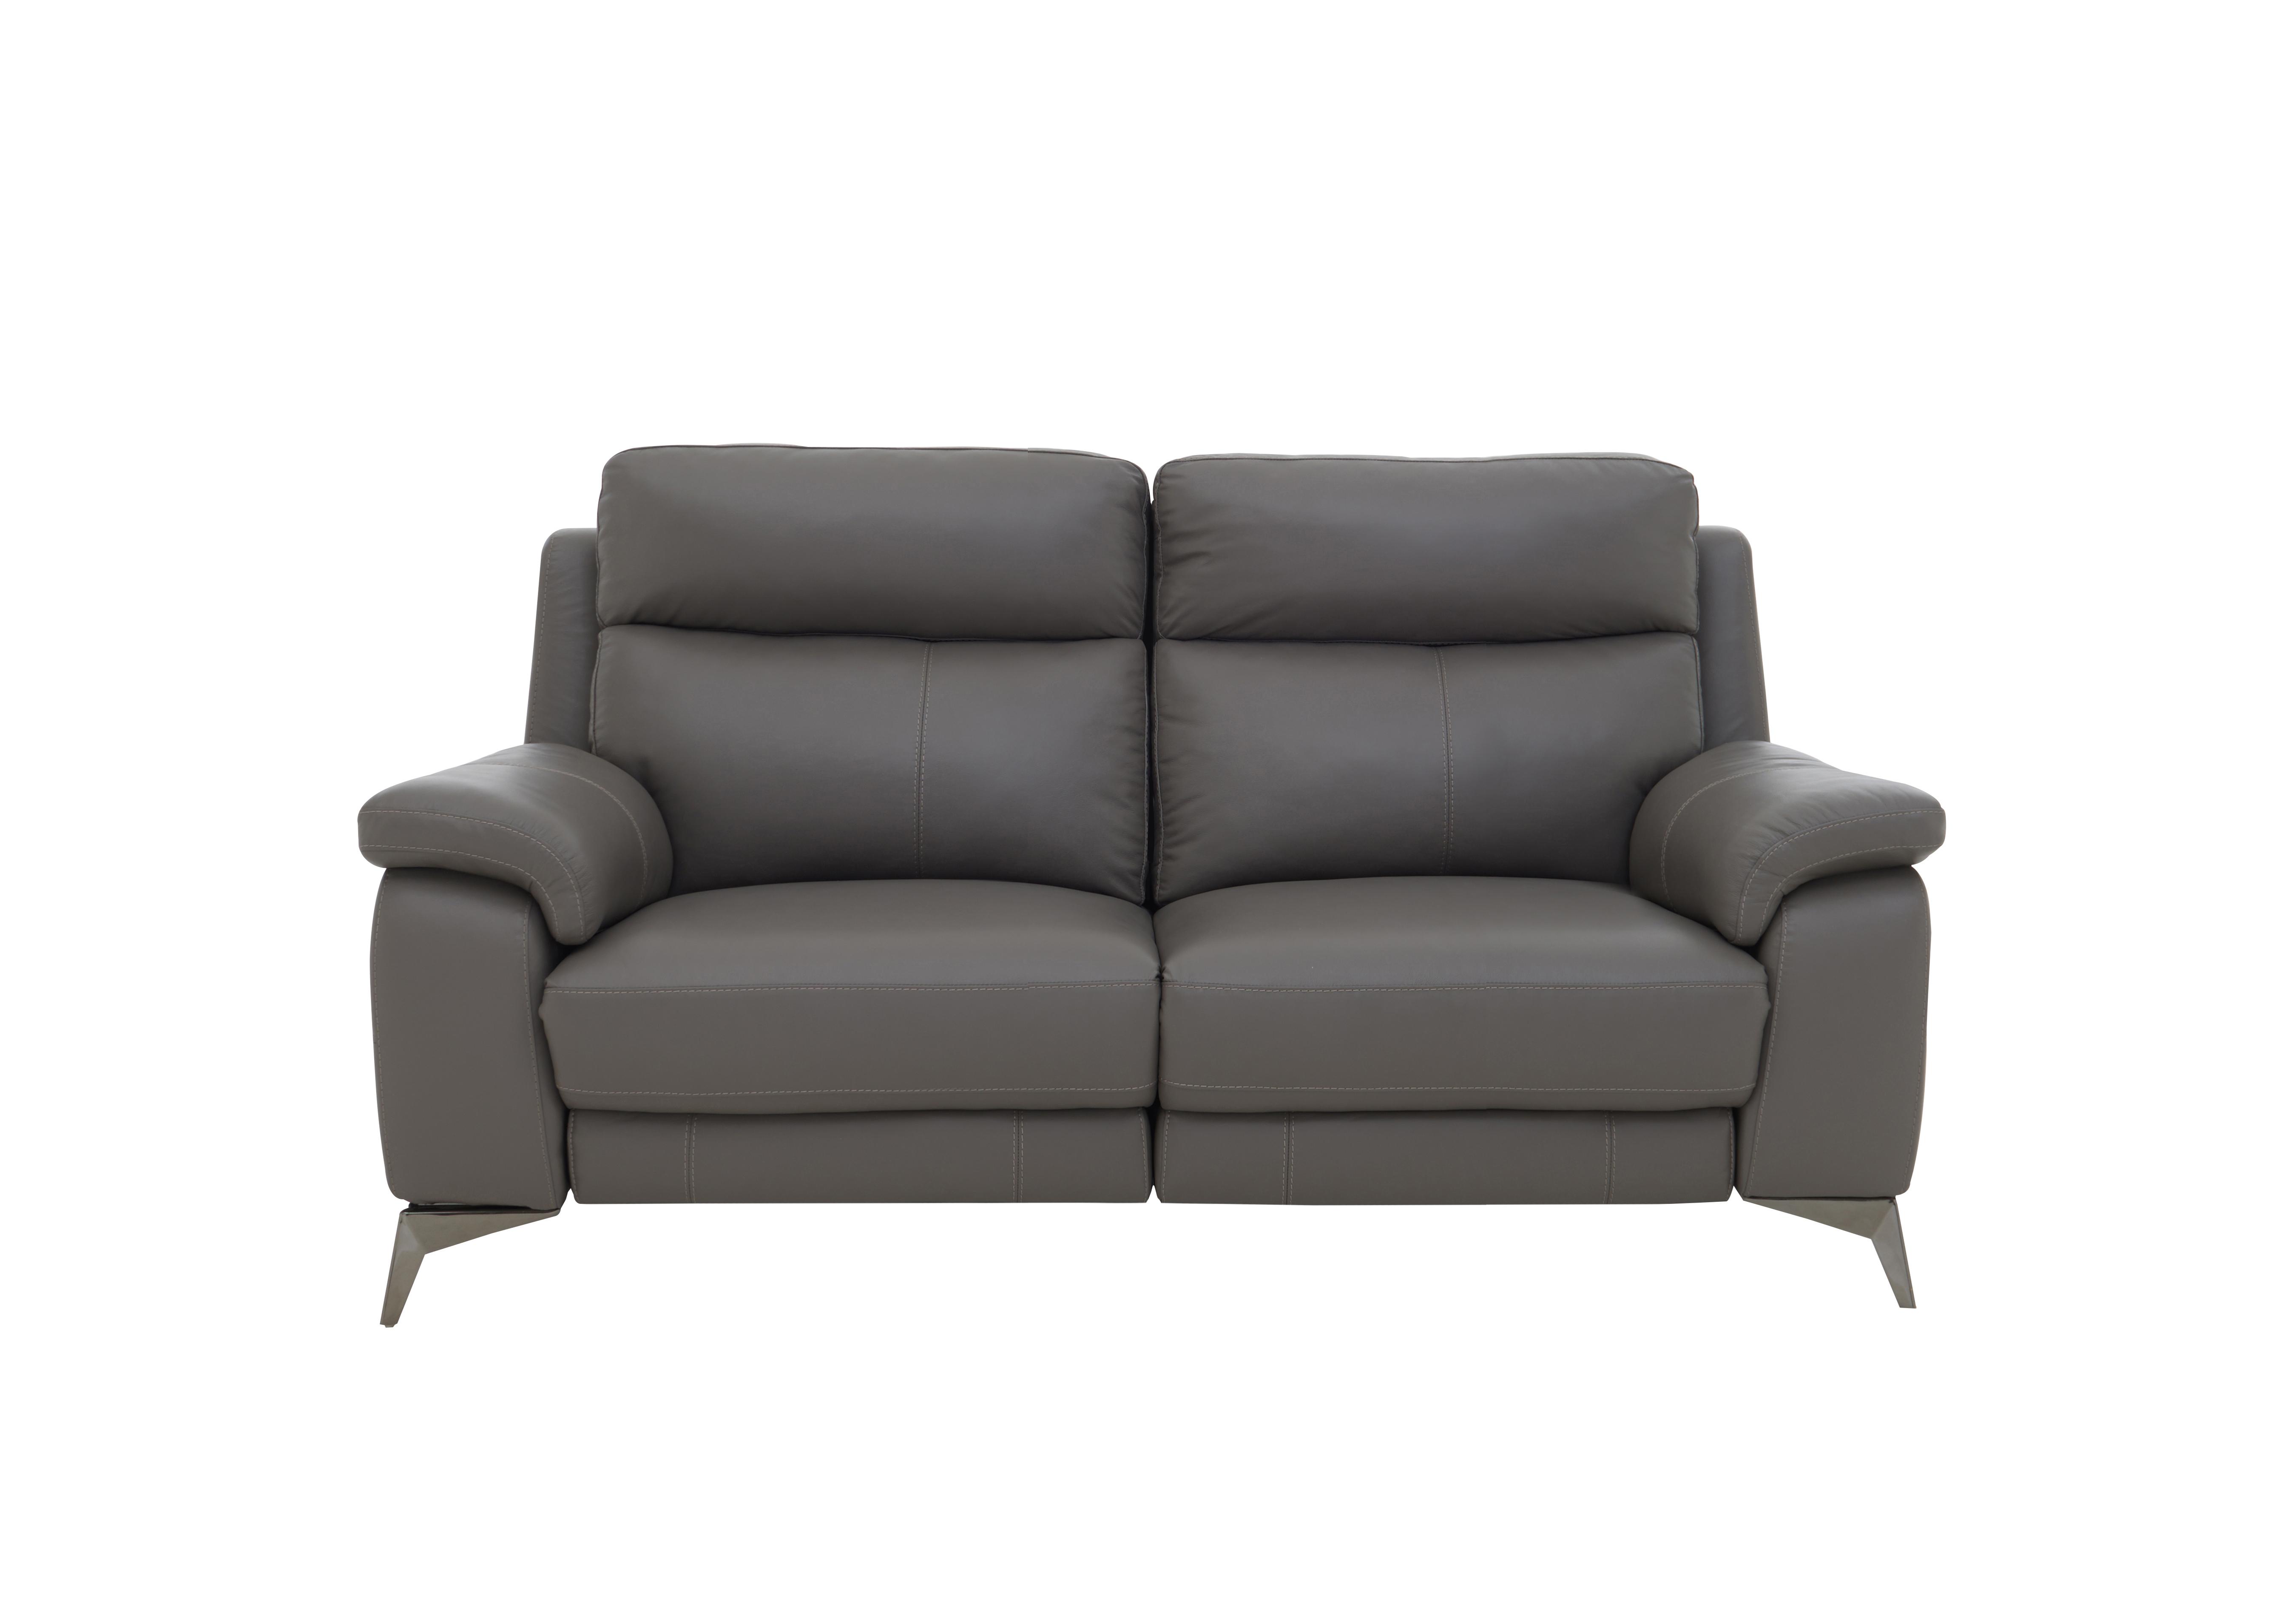 Missouri 2 Seater Leather Recliner Sofa with Power Headrest in Bv-042e Elephant on Furniture Village